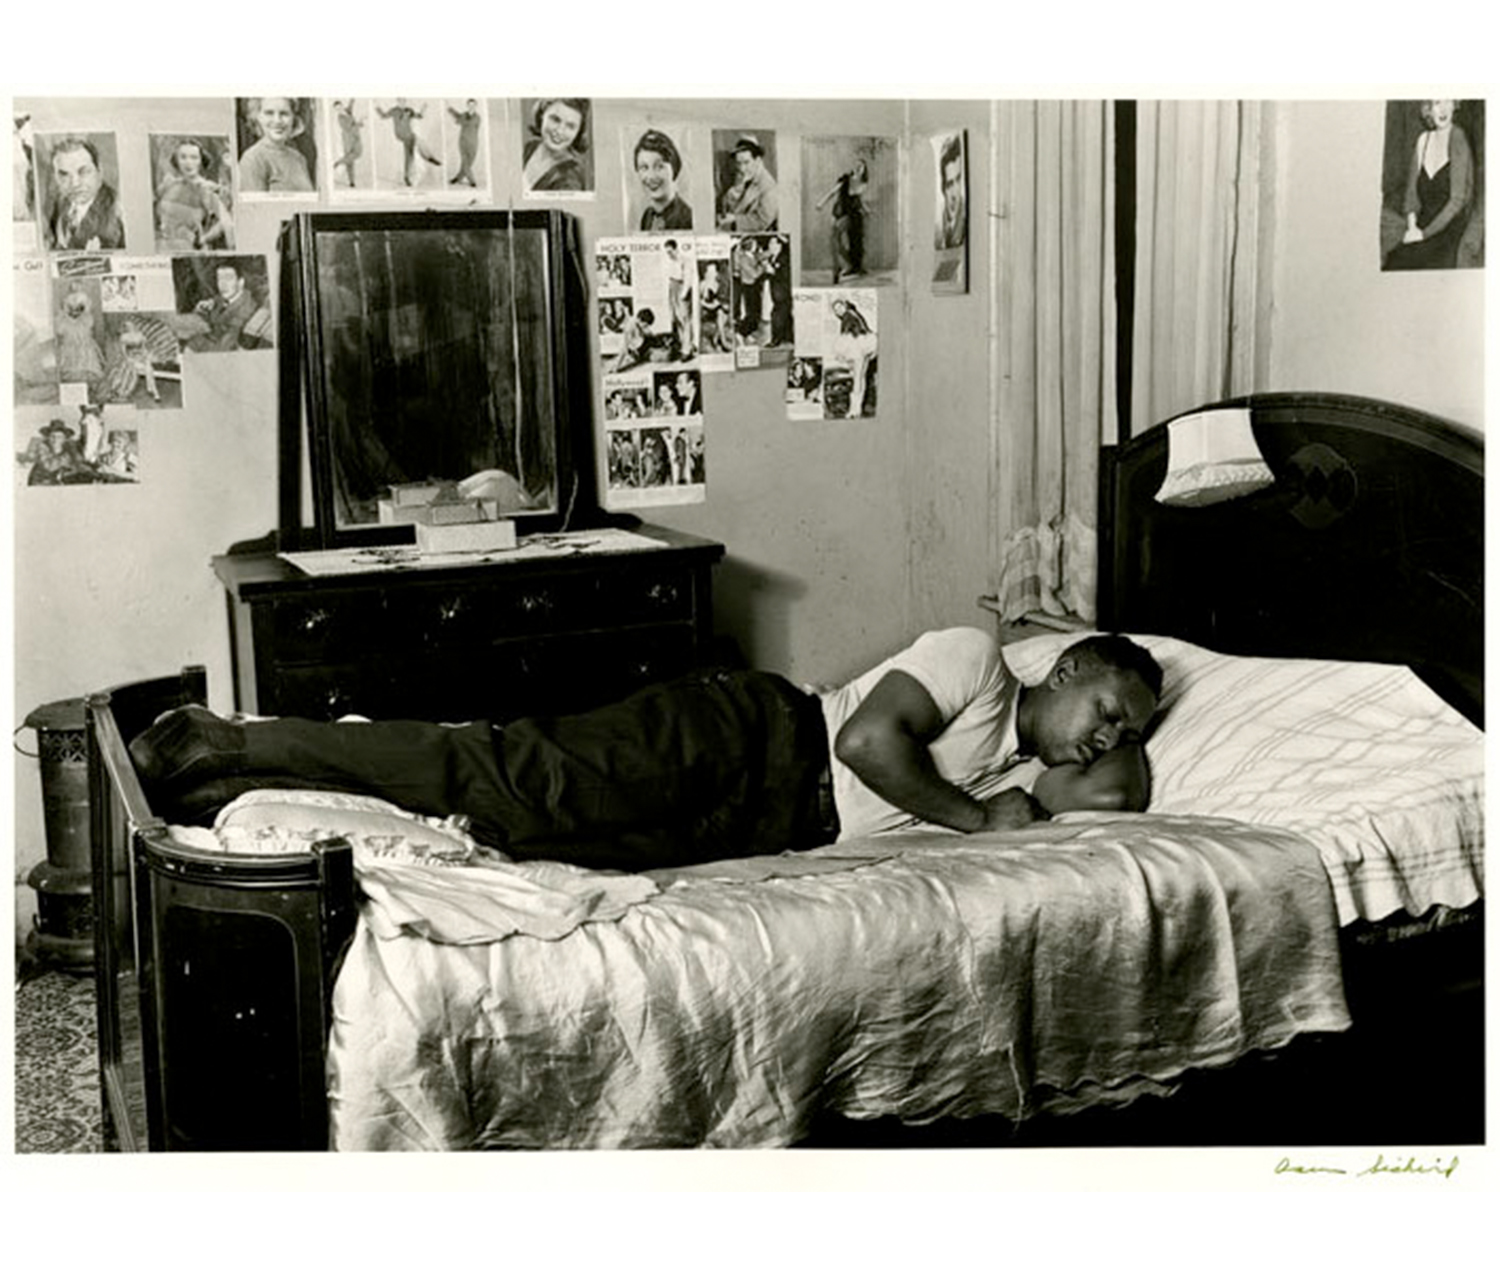 man lying on a bed, turning toward the camera; in the background, a chest of drawers, a mirror, and photographs taped to the wall